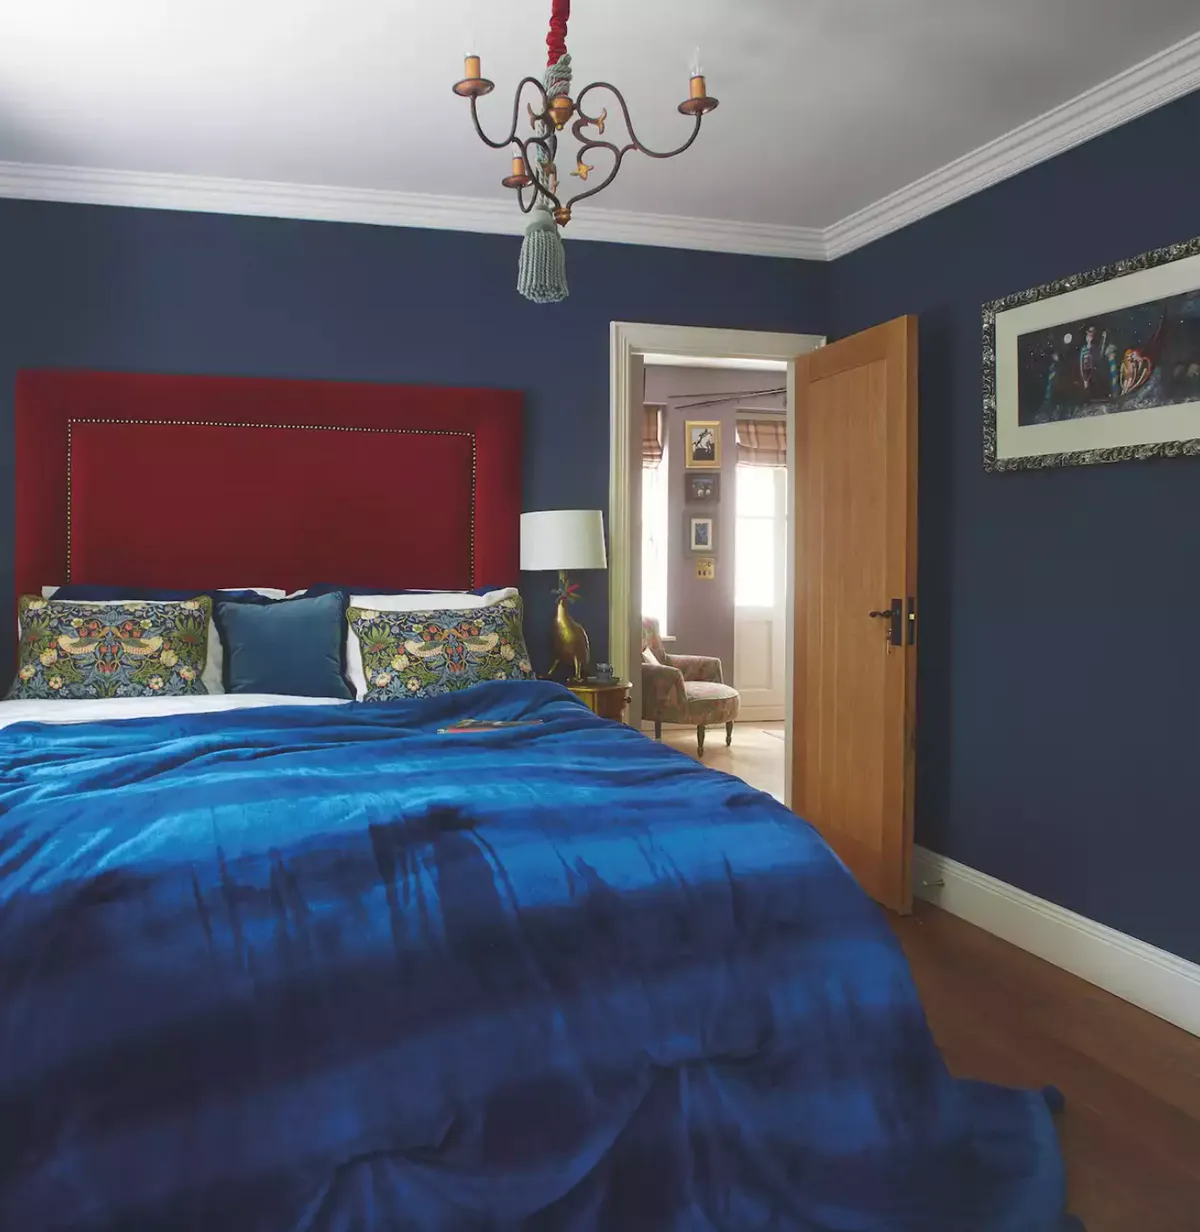 Haley and Eugene painted their bedroom walls in Zoffany’s Como Blue. See their home makeover.